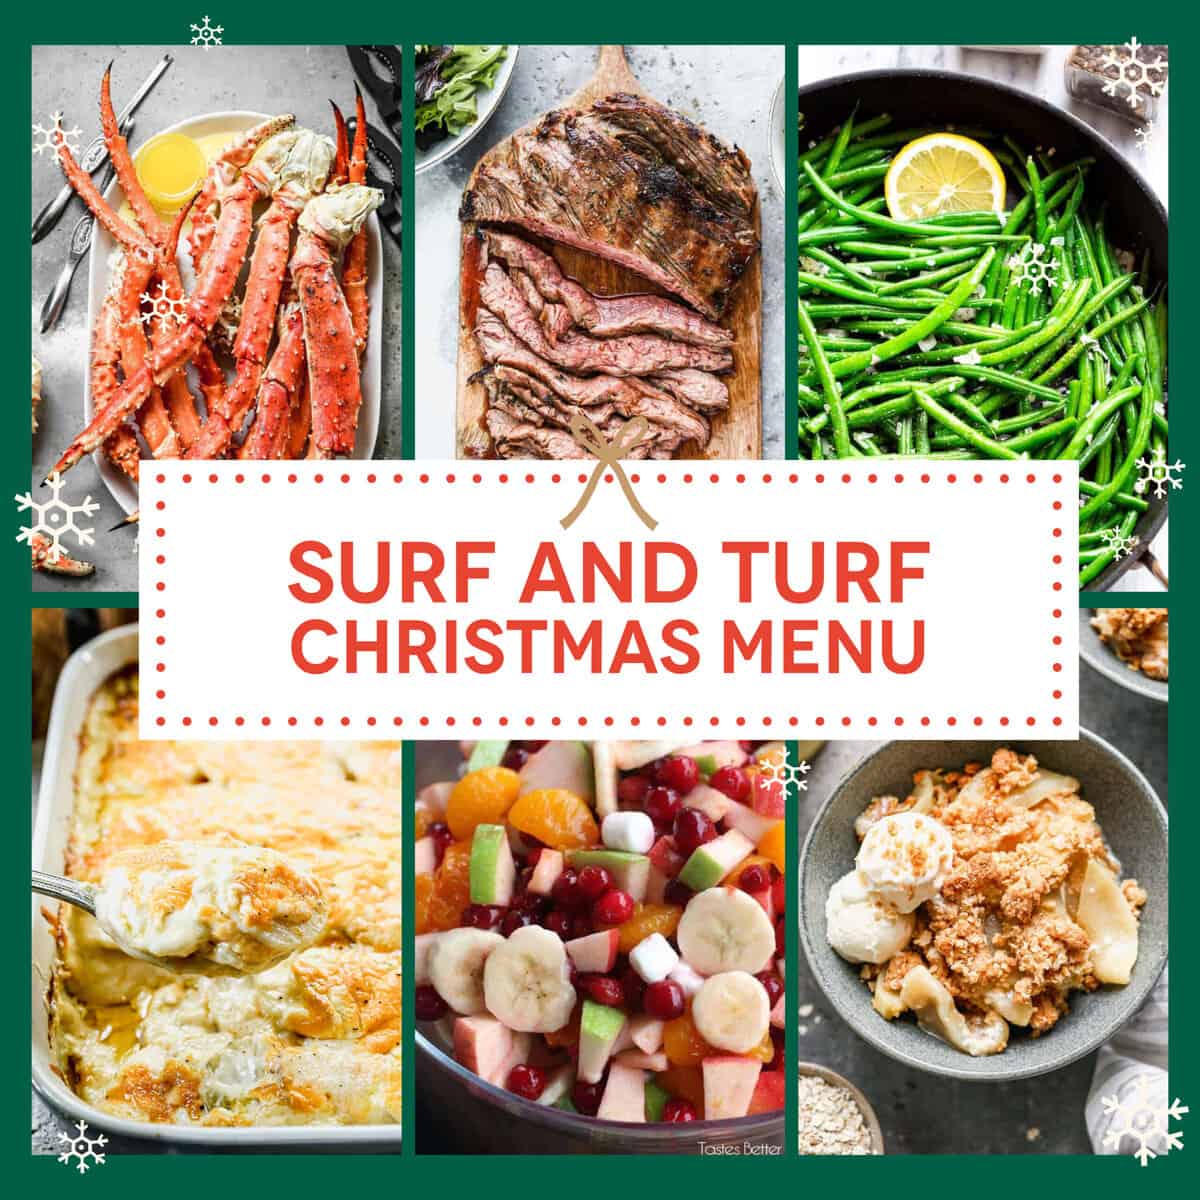 A graphic showing a classic surf and turf menu idea for Christmas dinner.